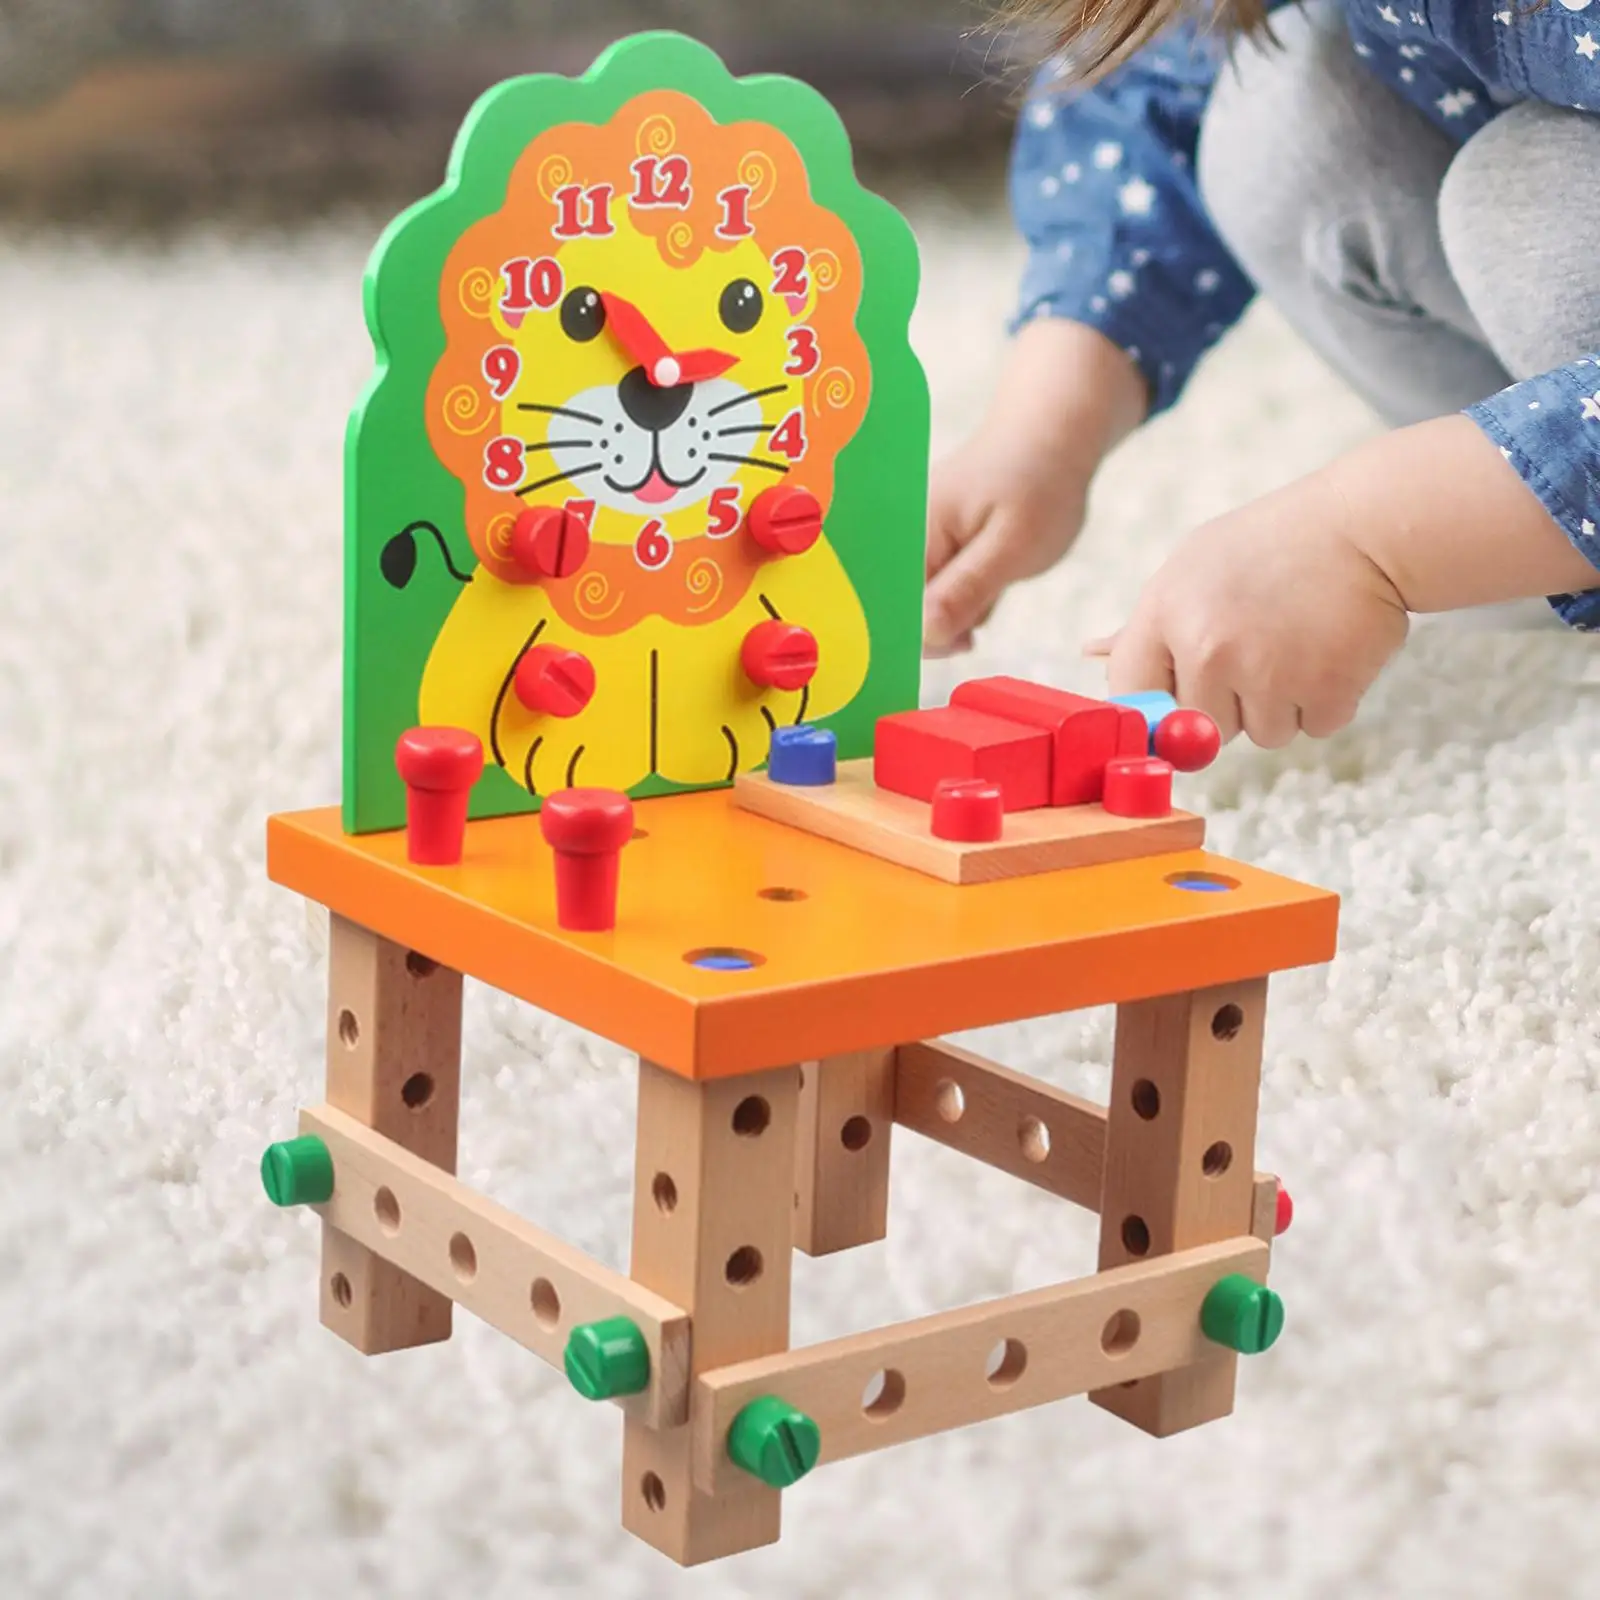 Kids Wooden Project Woodworking Kit with Tools for Children Toddler Gifts